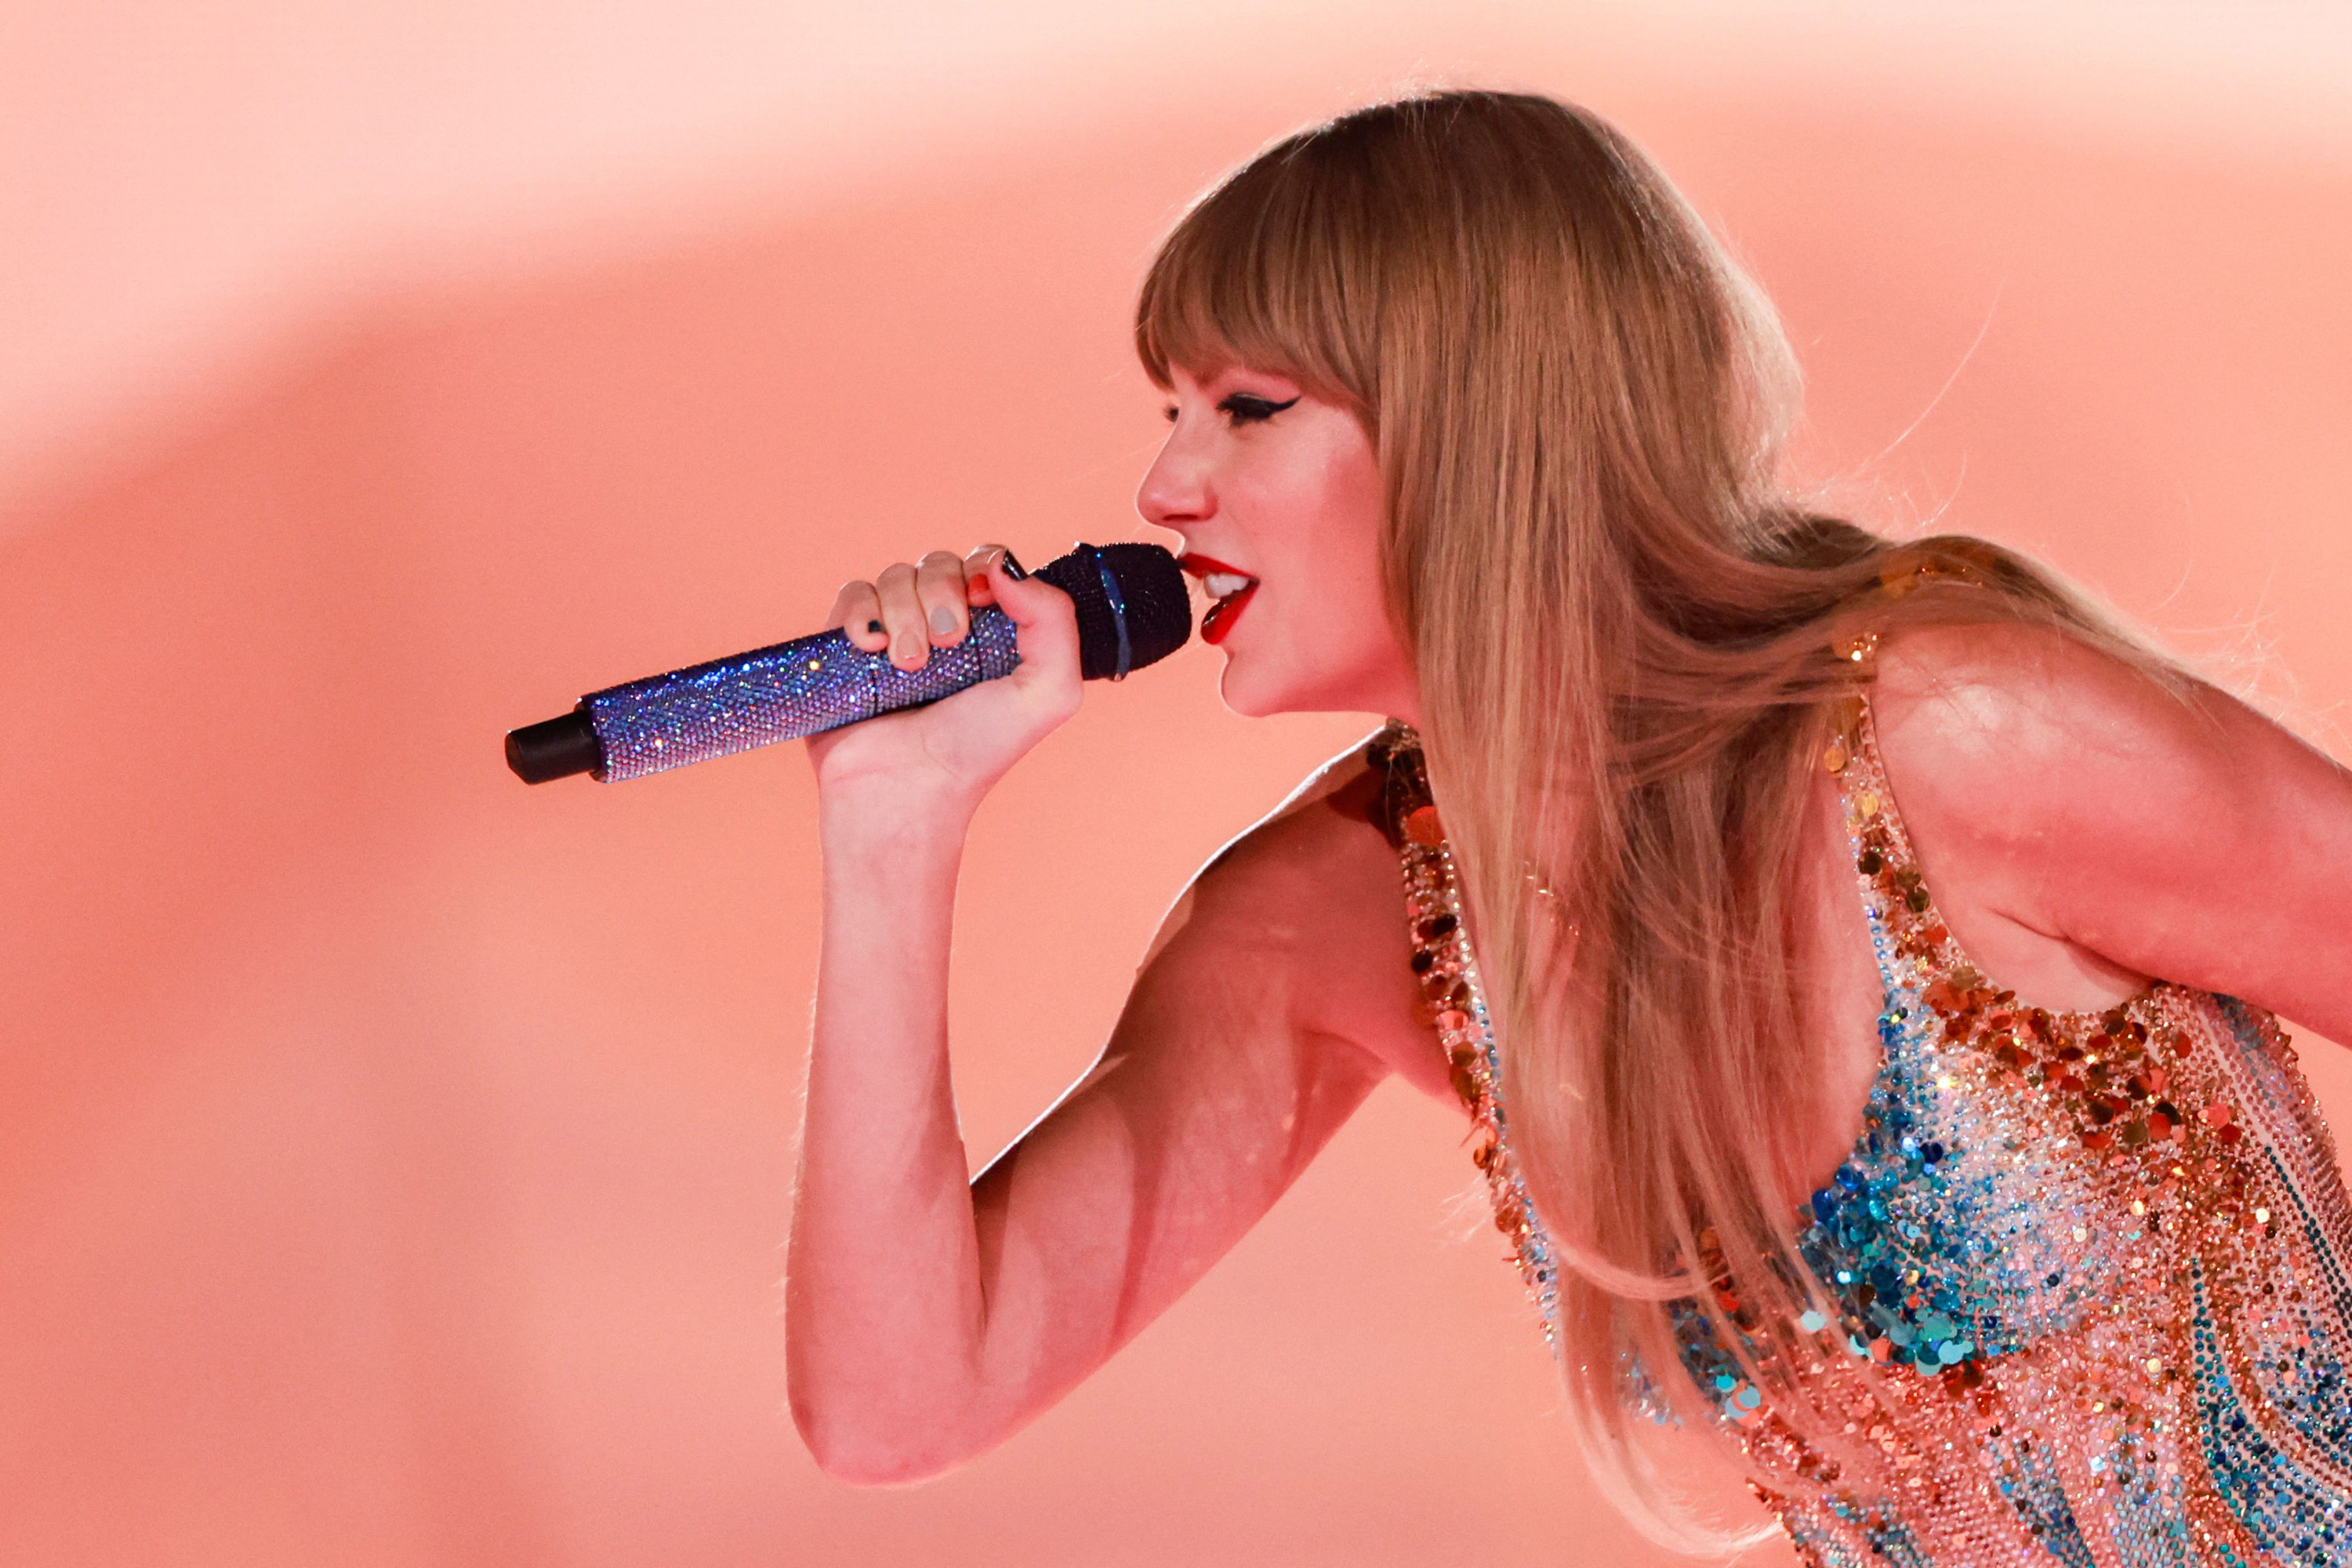 What is the 'Taylor Swift effect' and why might it be helping to